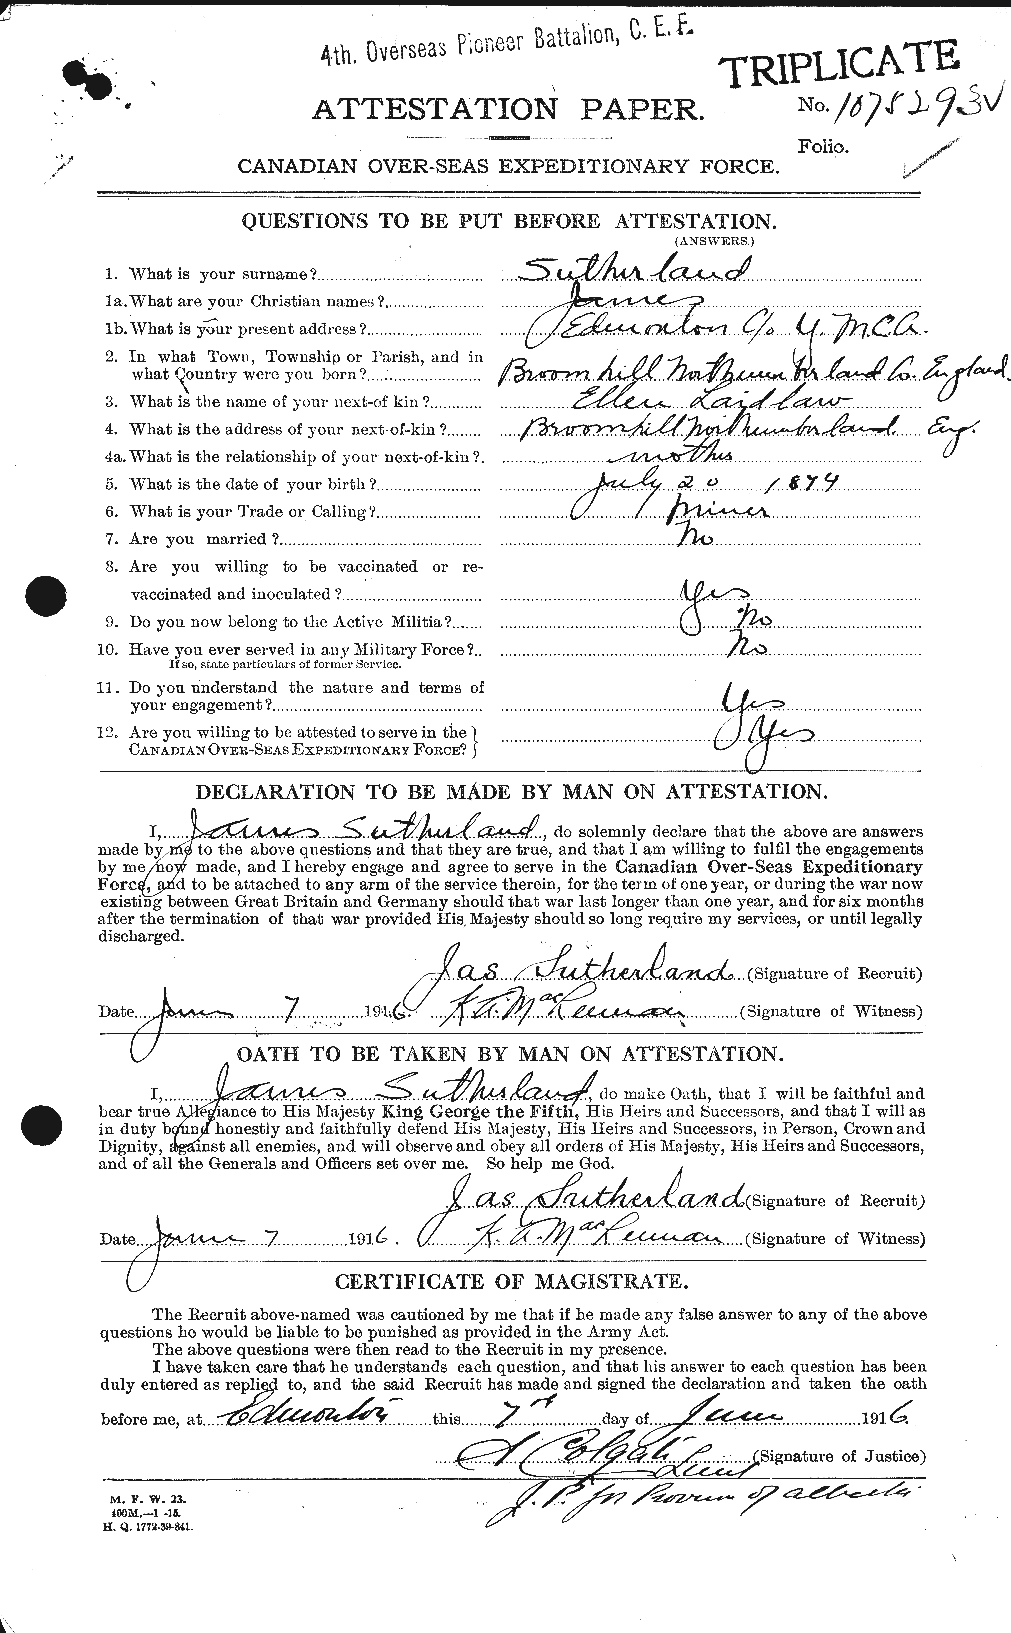 Personnel Records of the First World War - CEF 124760a